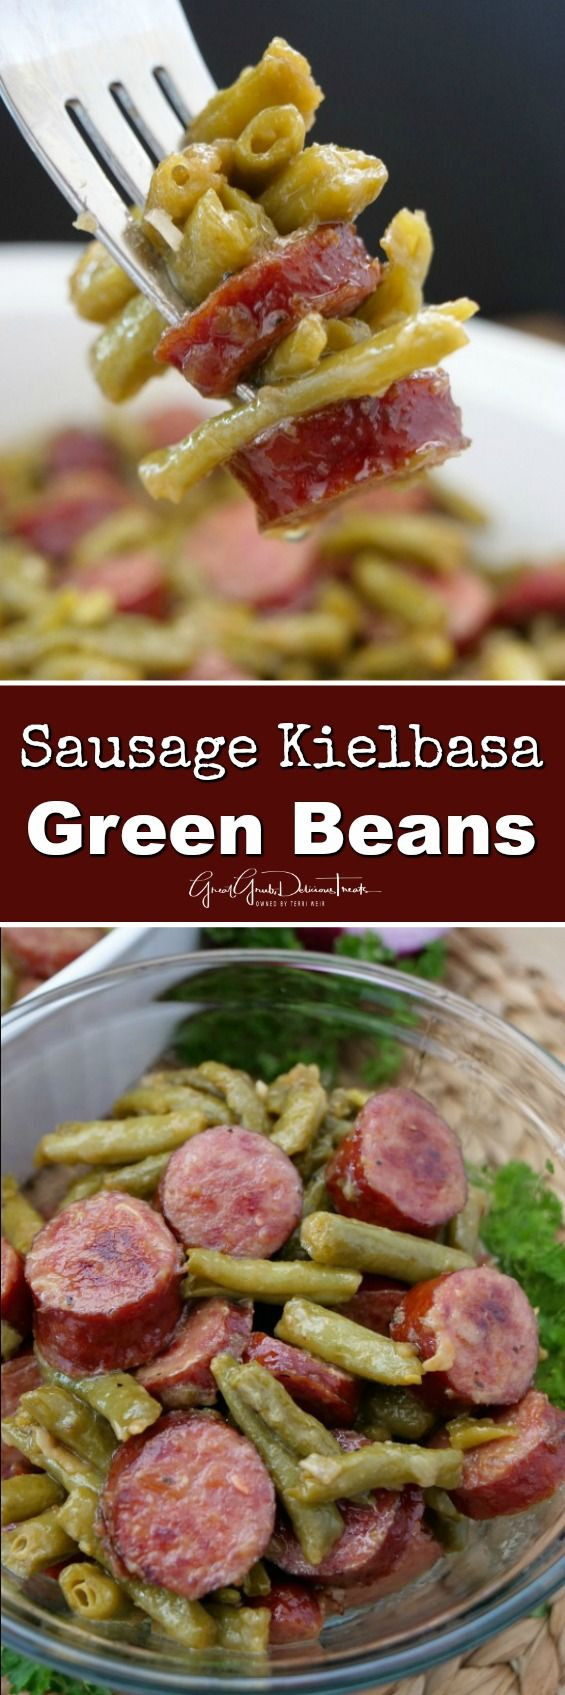 Side Dishes For Kielbasa
 Sausage Kielbasa Green Beans are deliciously flavored and